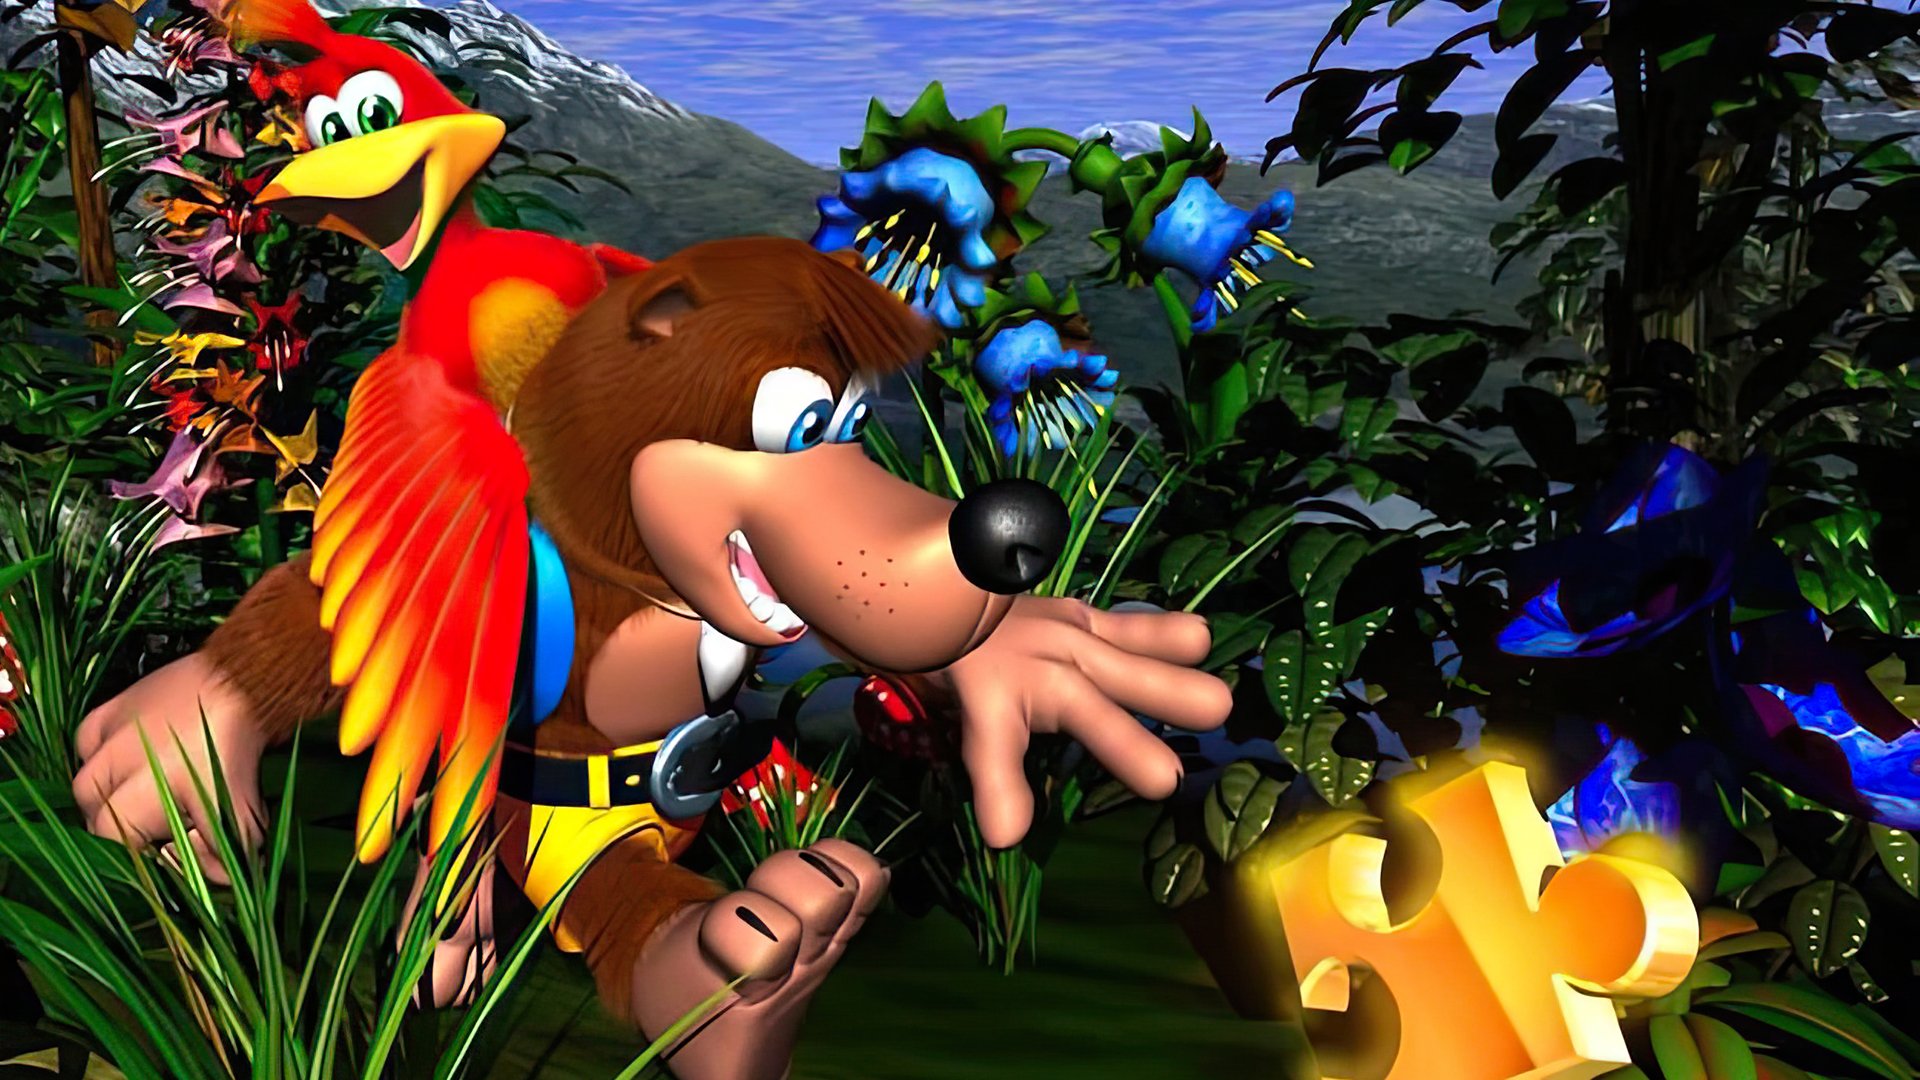 Banjo Kazooie Nintendo Switch News: Release Date Rumours, Rare and